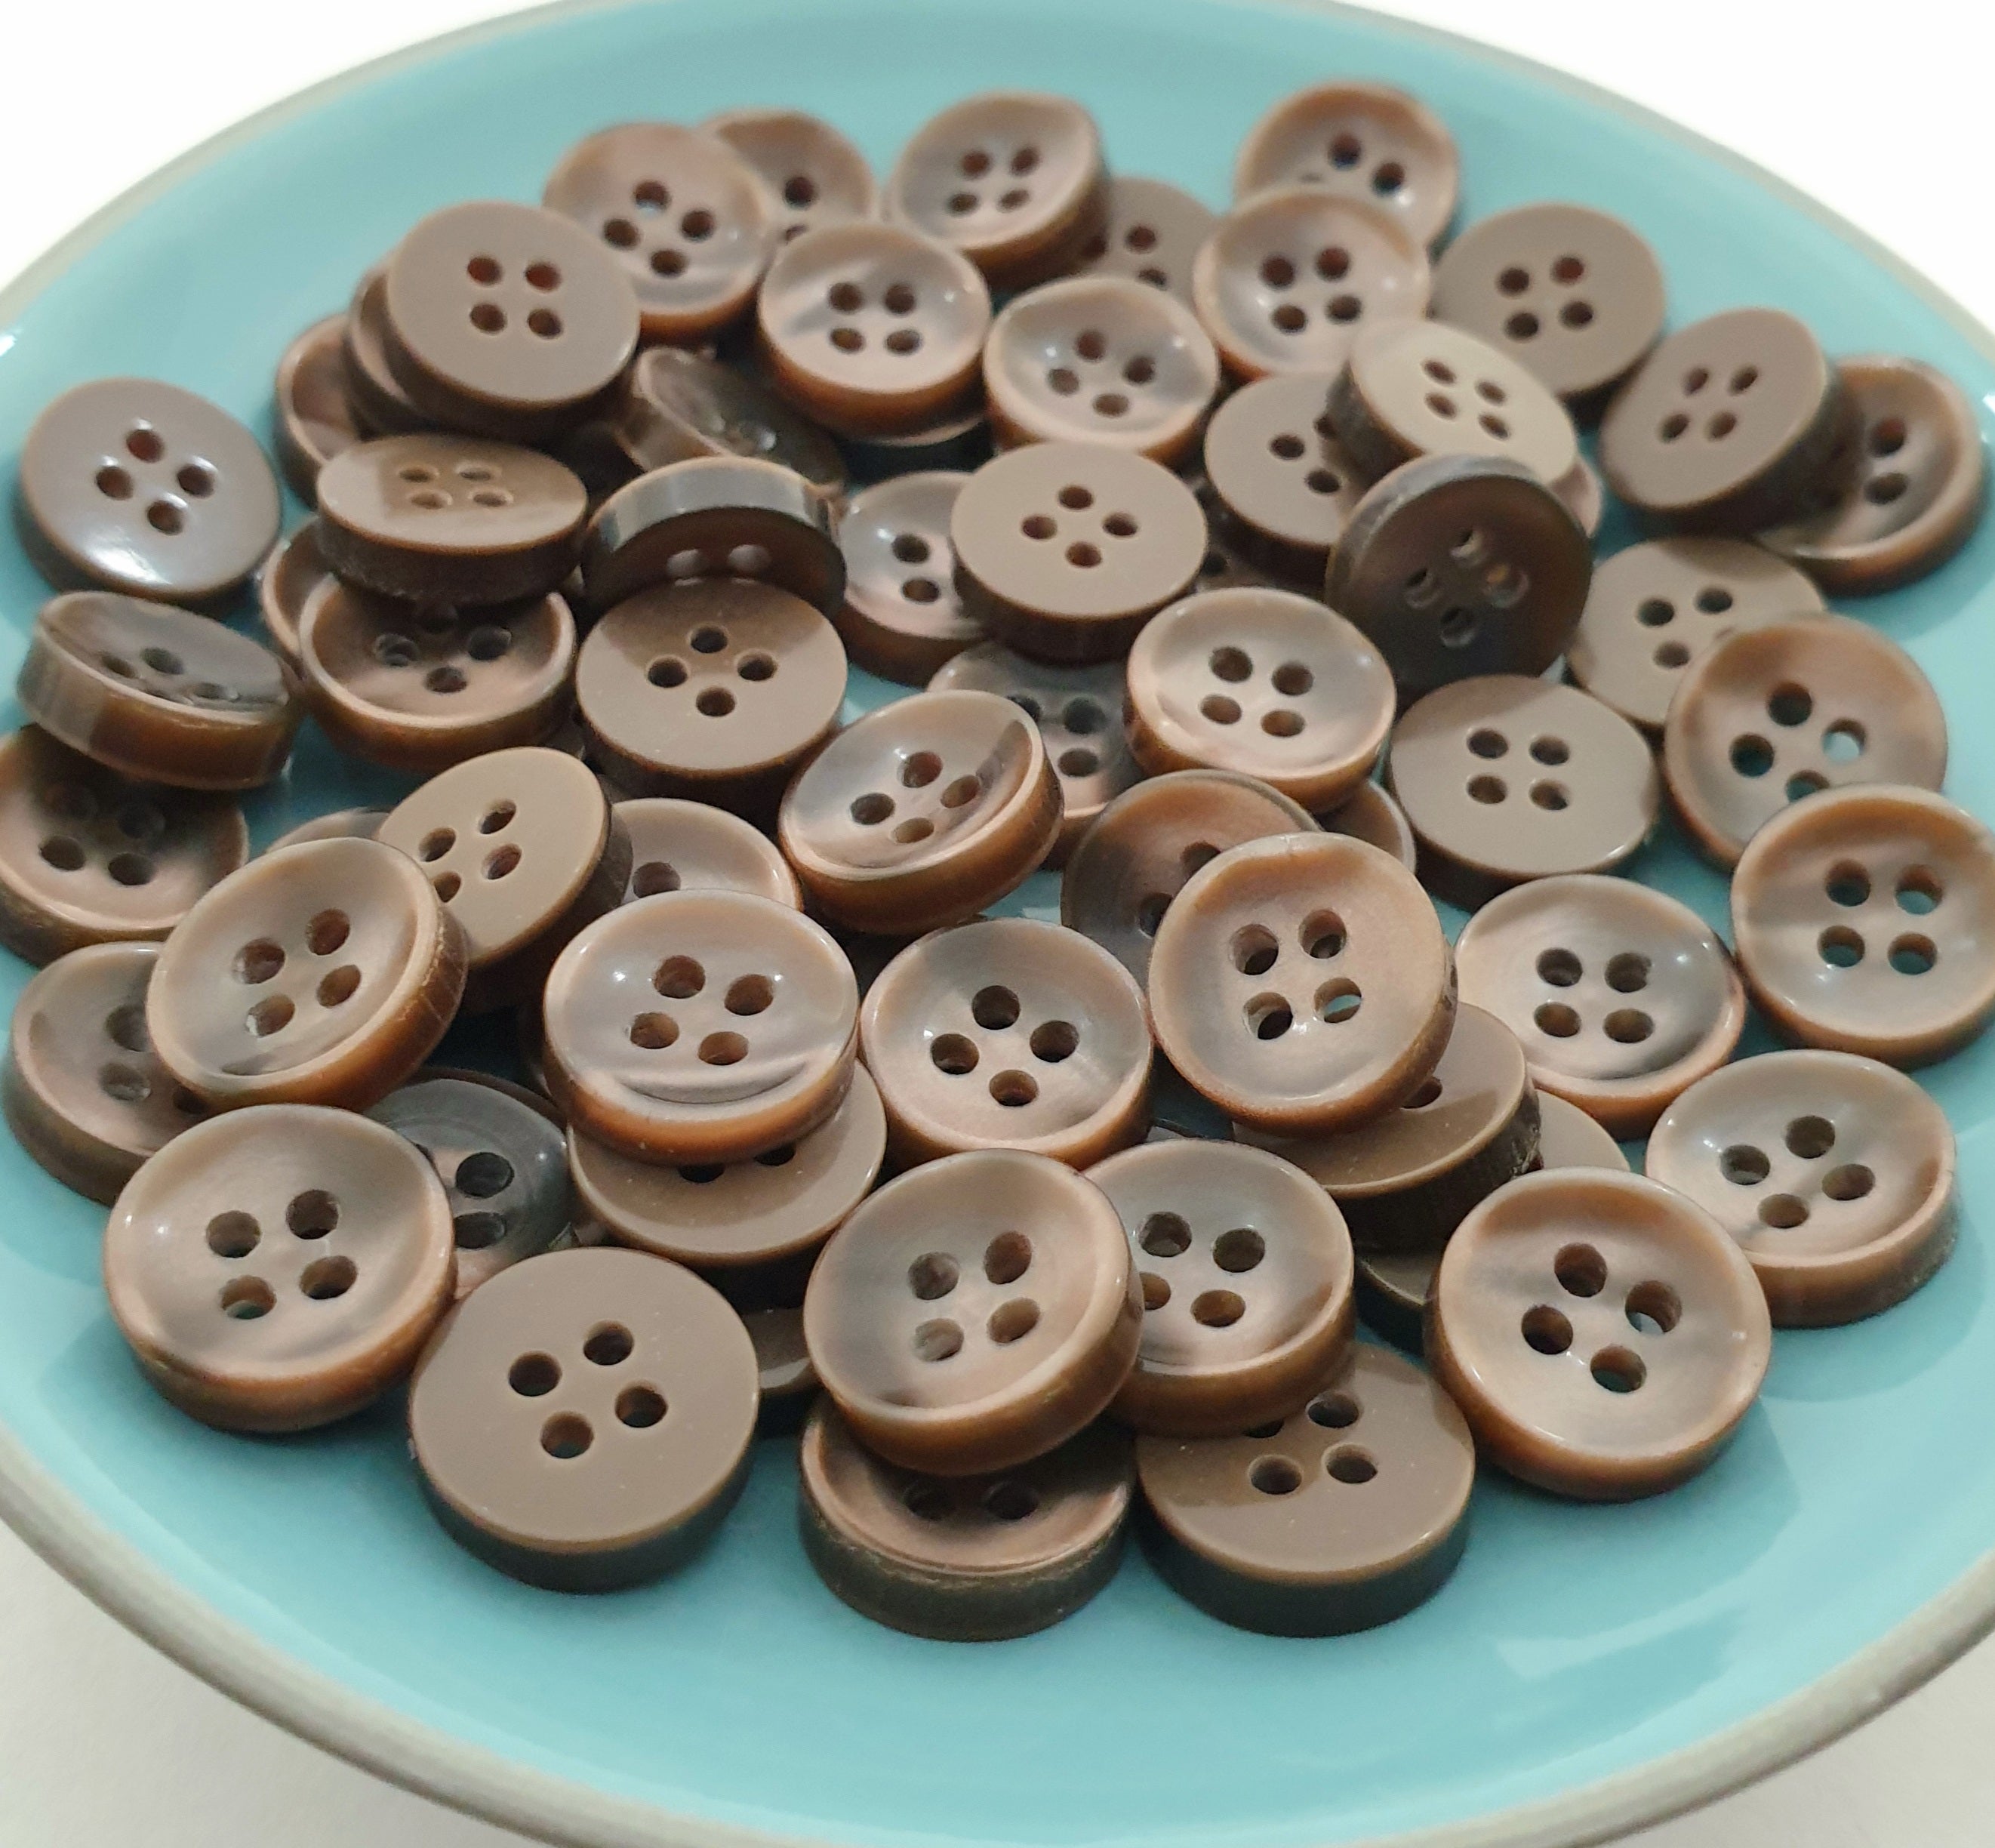 MajorCrafts 80pcs 11.5mm Deep Brown Pearlescent 4 Holes High-Grade Round Resin Small Sewing Buttons